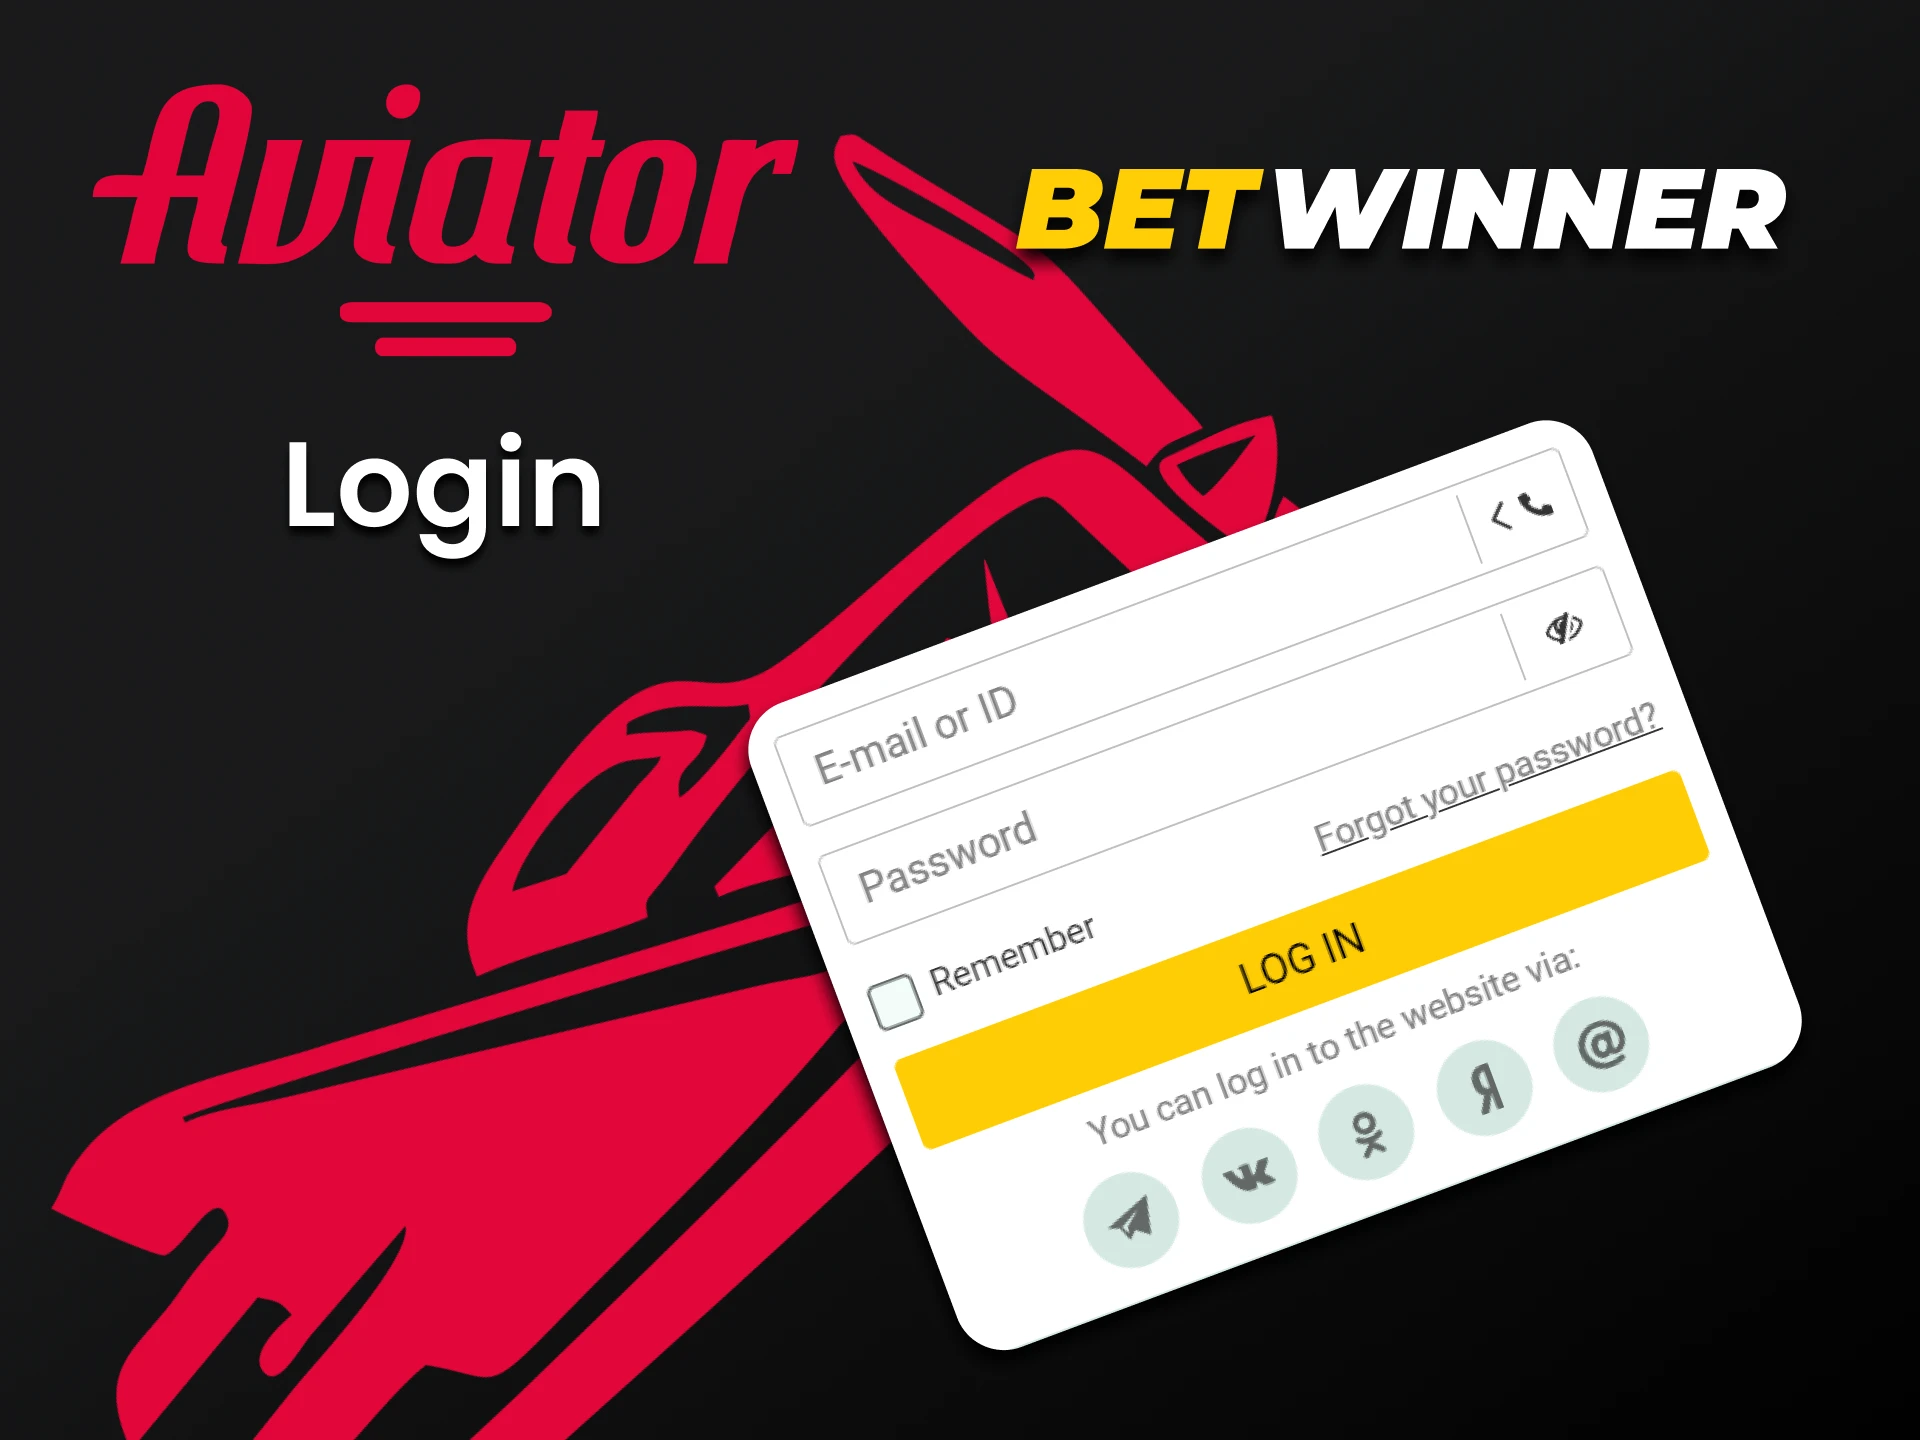 Log in to your personal Betwinner account to play Aviator.